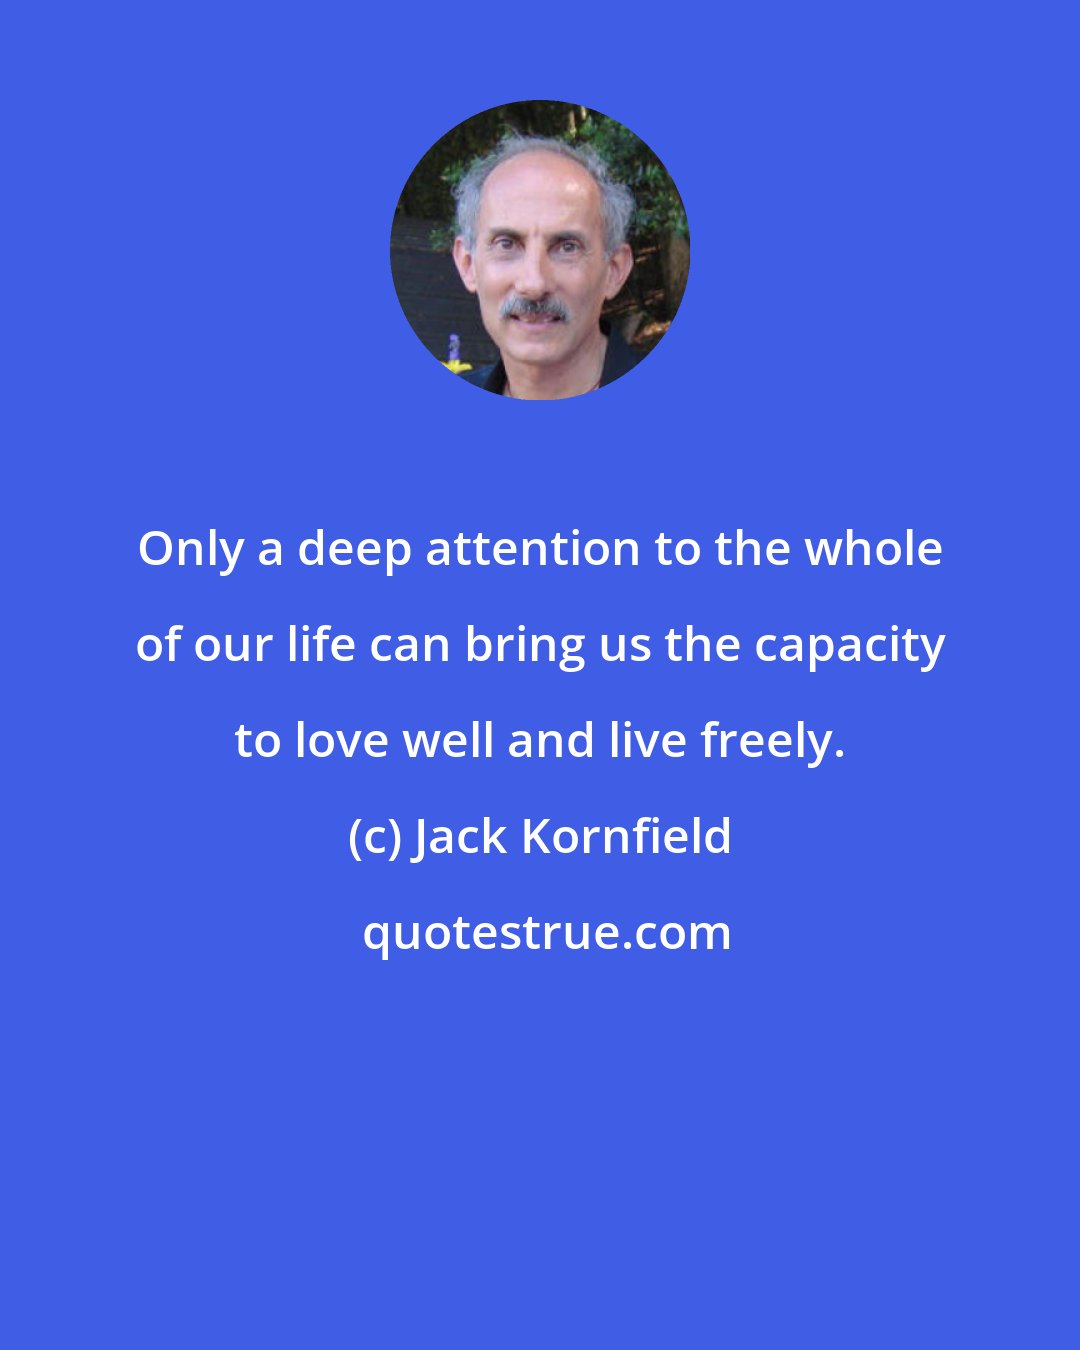 Jack Kornfield: Only a deep attention to the whole of our life can bring us the capacity to love well and live freely.